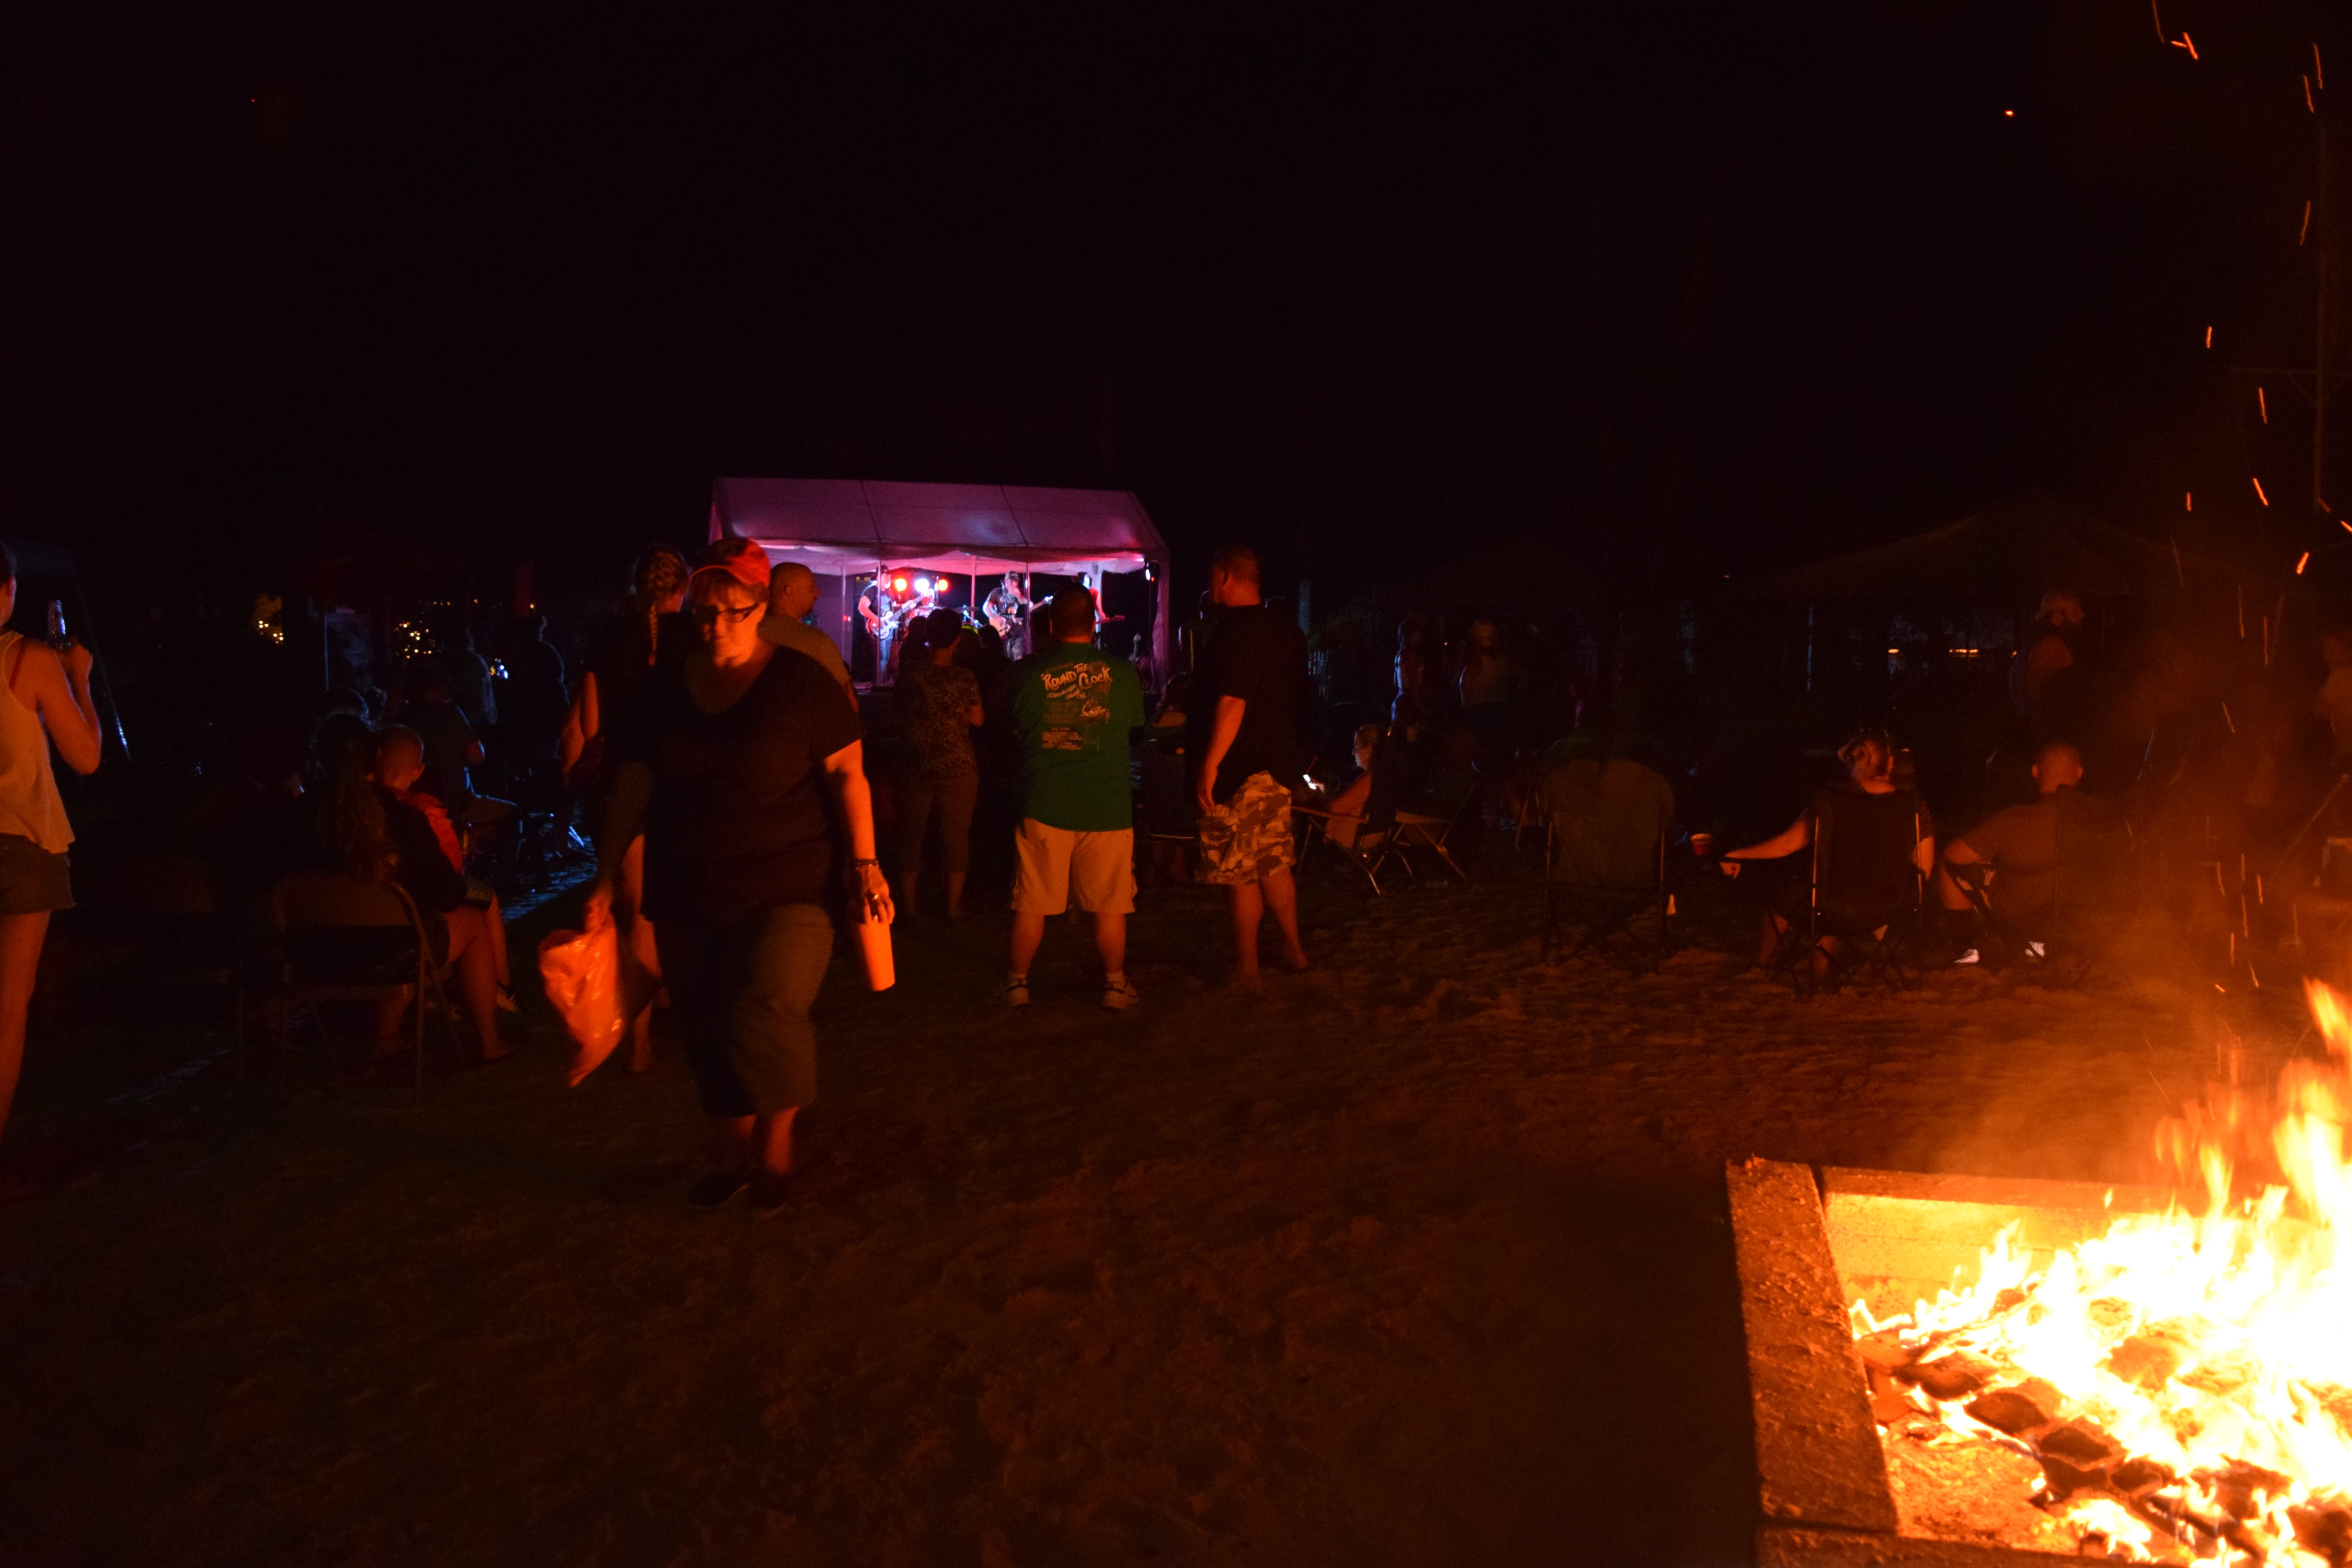 Firepit and band at Baker's Acres Annual Music Fest